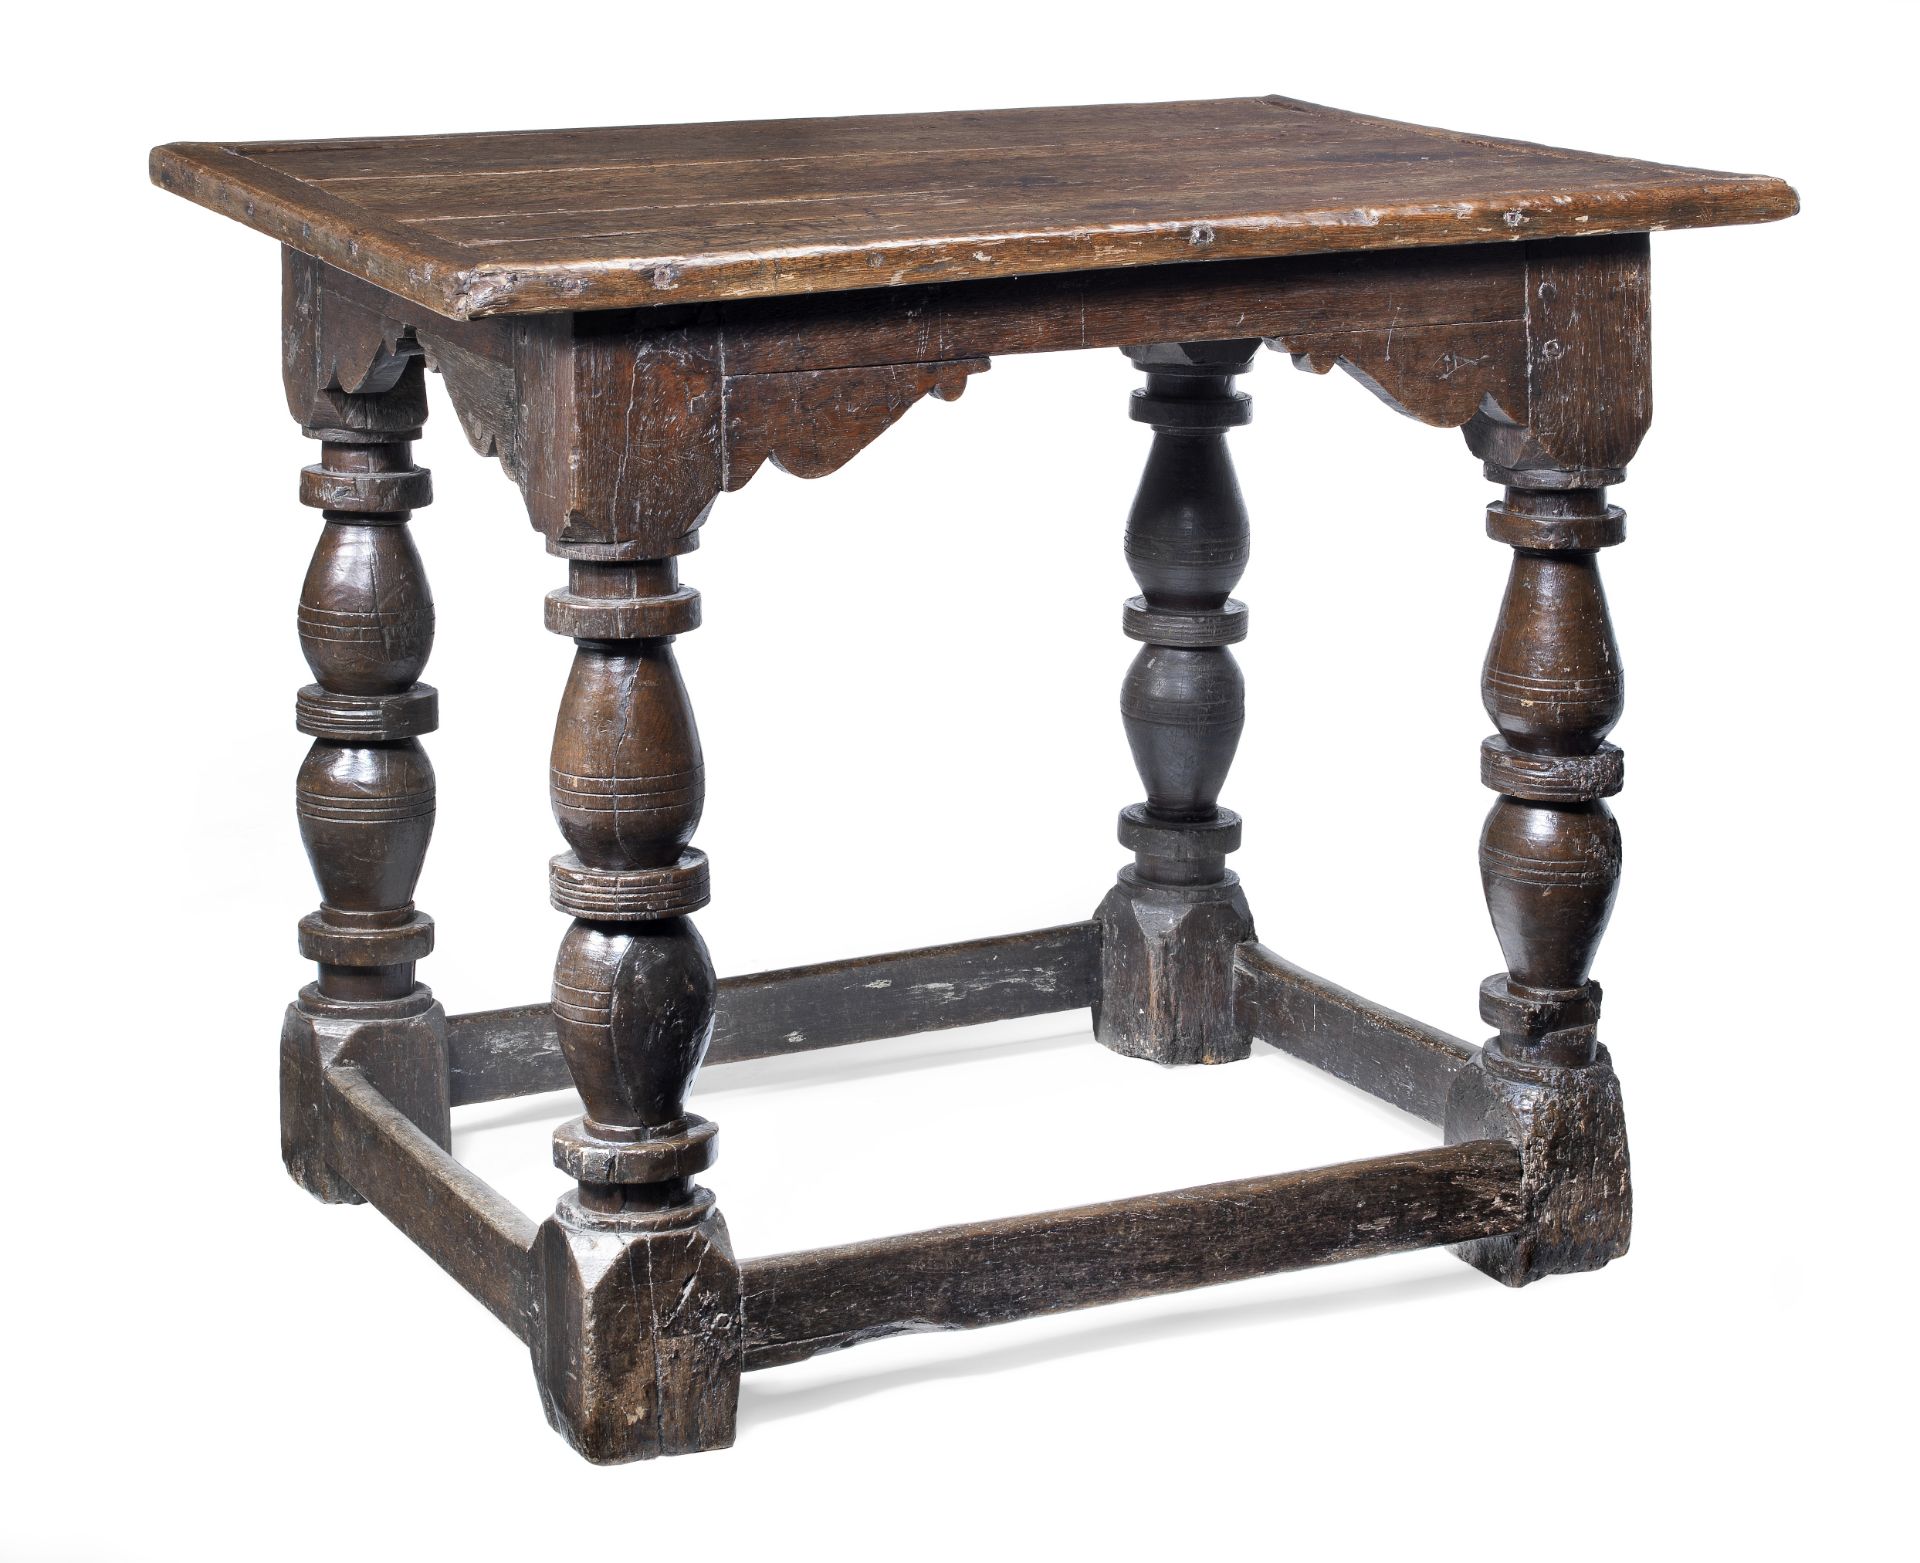 A rare Elizabeth I joined oak display/serving table, circa 1600 Made to accompany the 'Great Tabl...